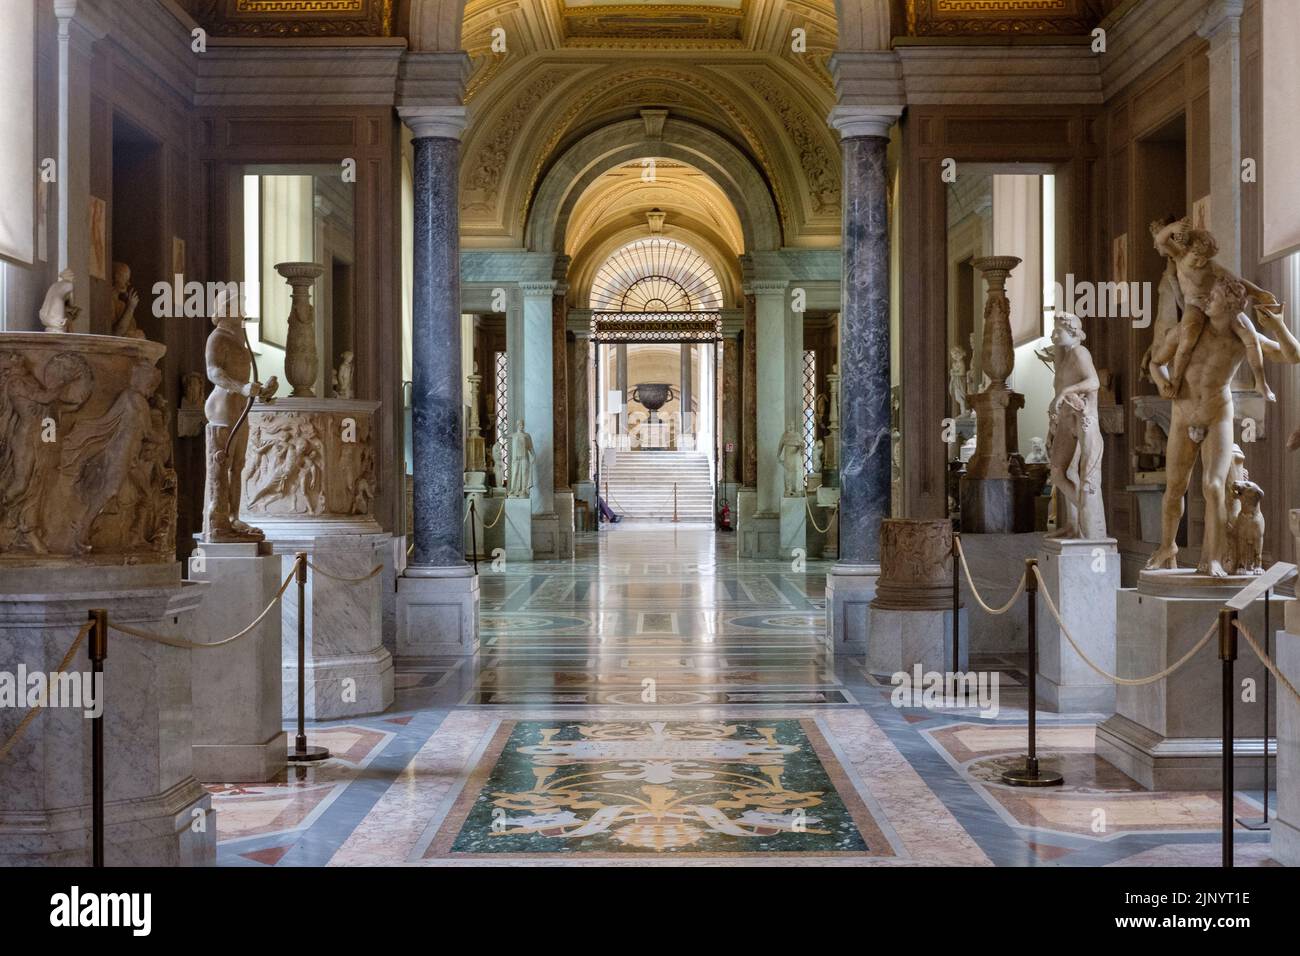 Inside the Vatican Museums in the Vatican City, Rome, Italy, in 2018. Stock Photo